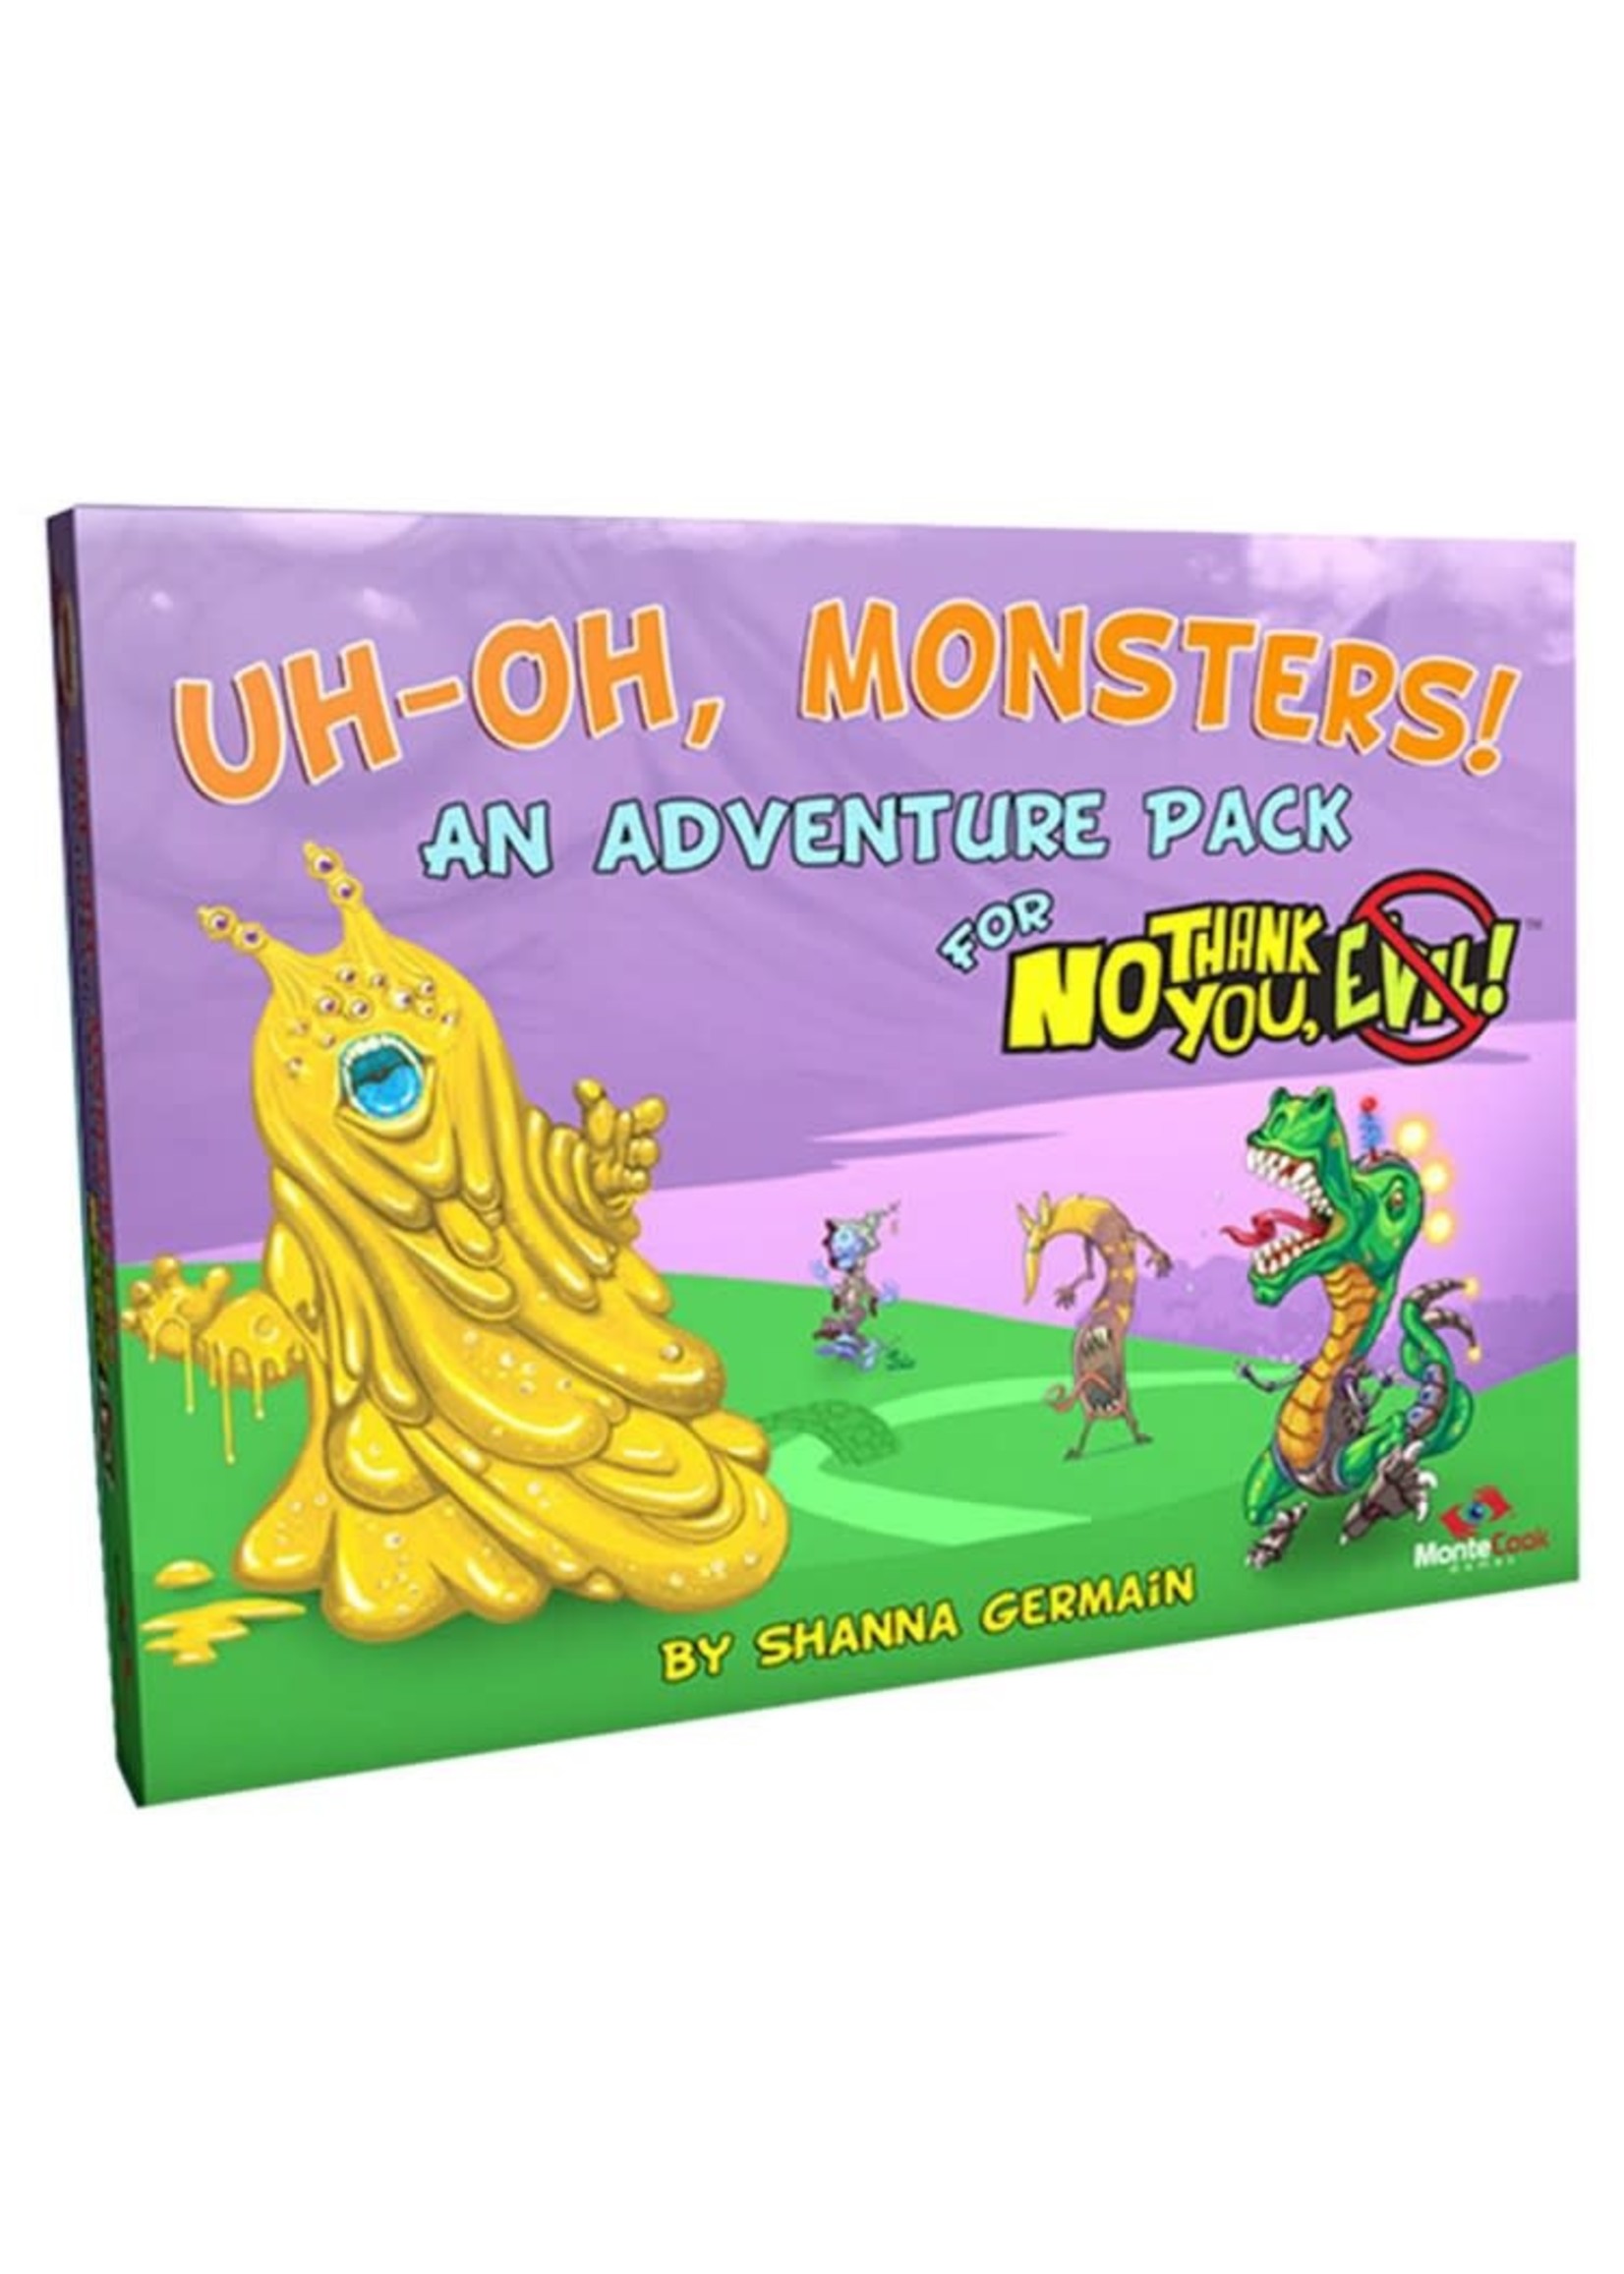 MONTE COOK GAMES No Thank You, Evil! Uh-Oh, Monsters